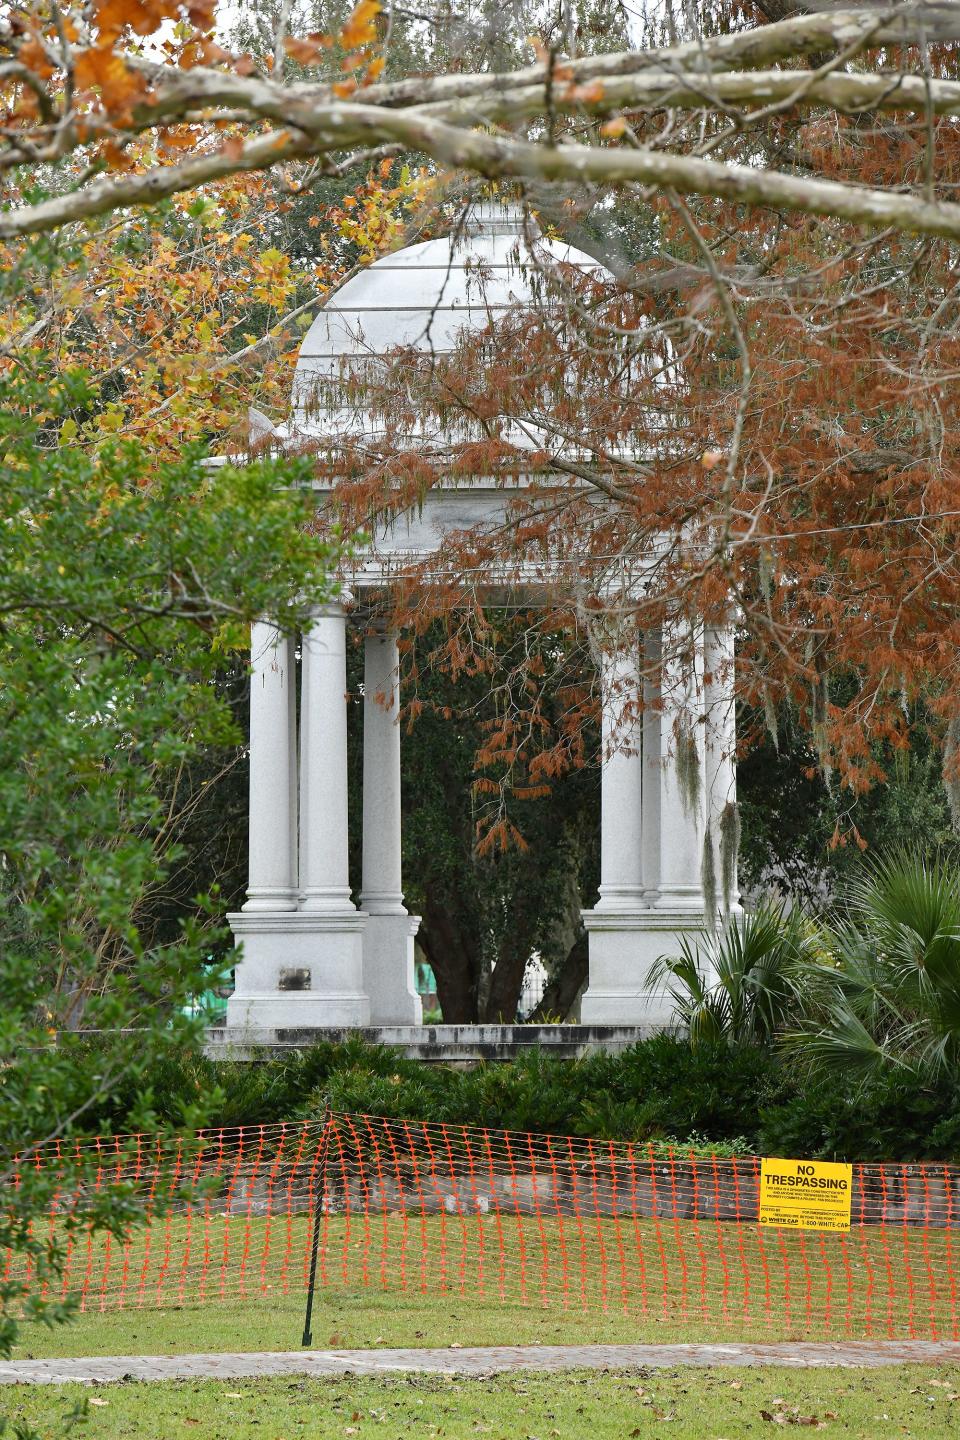 By the afternoon of Dec. 27, workers had removed the Confederate statues, plaques and pedestal from the "Women of the Southland" monument in Jacksonville's Springfield Park and covered markings on the large structure. The removed pieces were loaded onto flatbed trucks after years of debate about the fate of the pro confederate structure. Jacksonville's Mayor Donna Deegan made removing the monument a major part of her successful campaign for mayor.